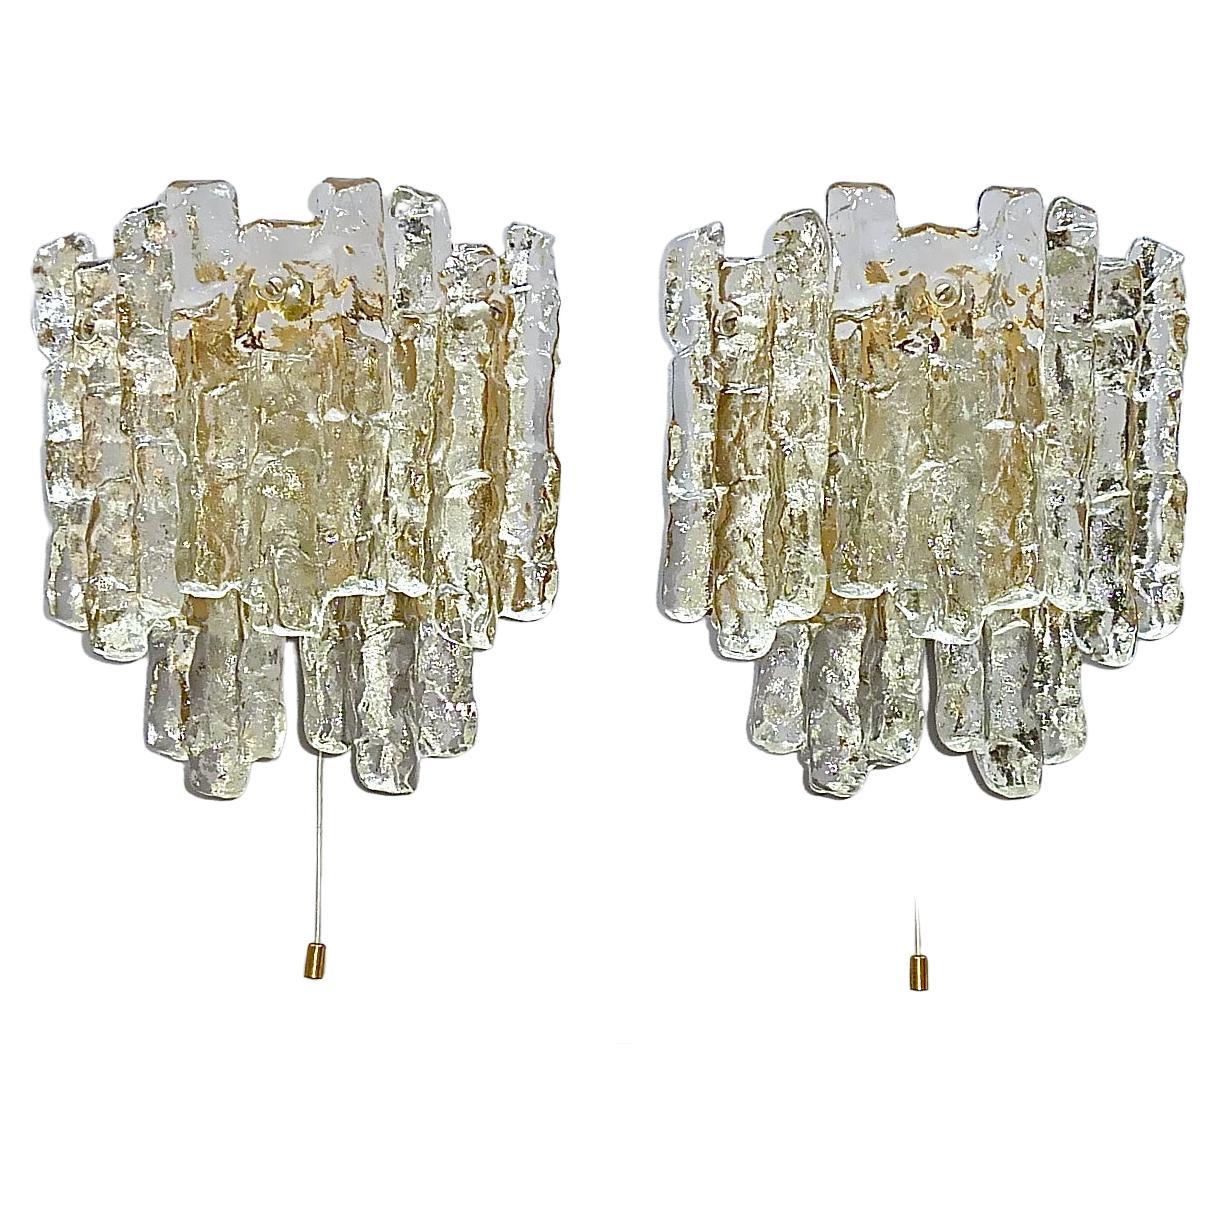 Signed Pair J.T. Kalmar Sconces Large Golden Wall Lamps Murano Ice Glass 1960s